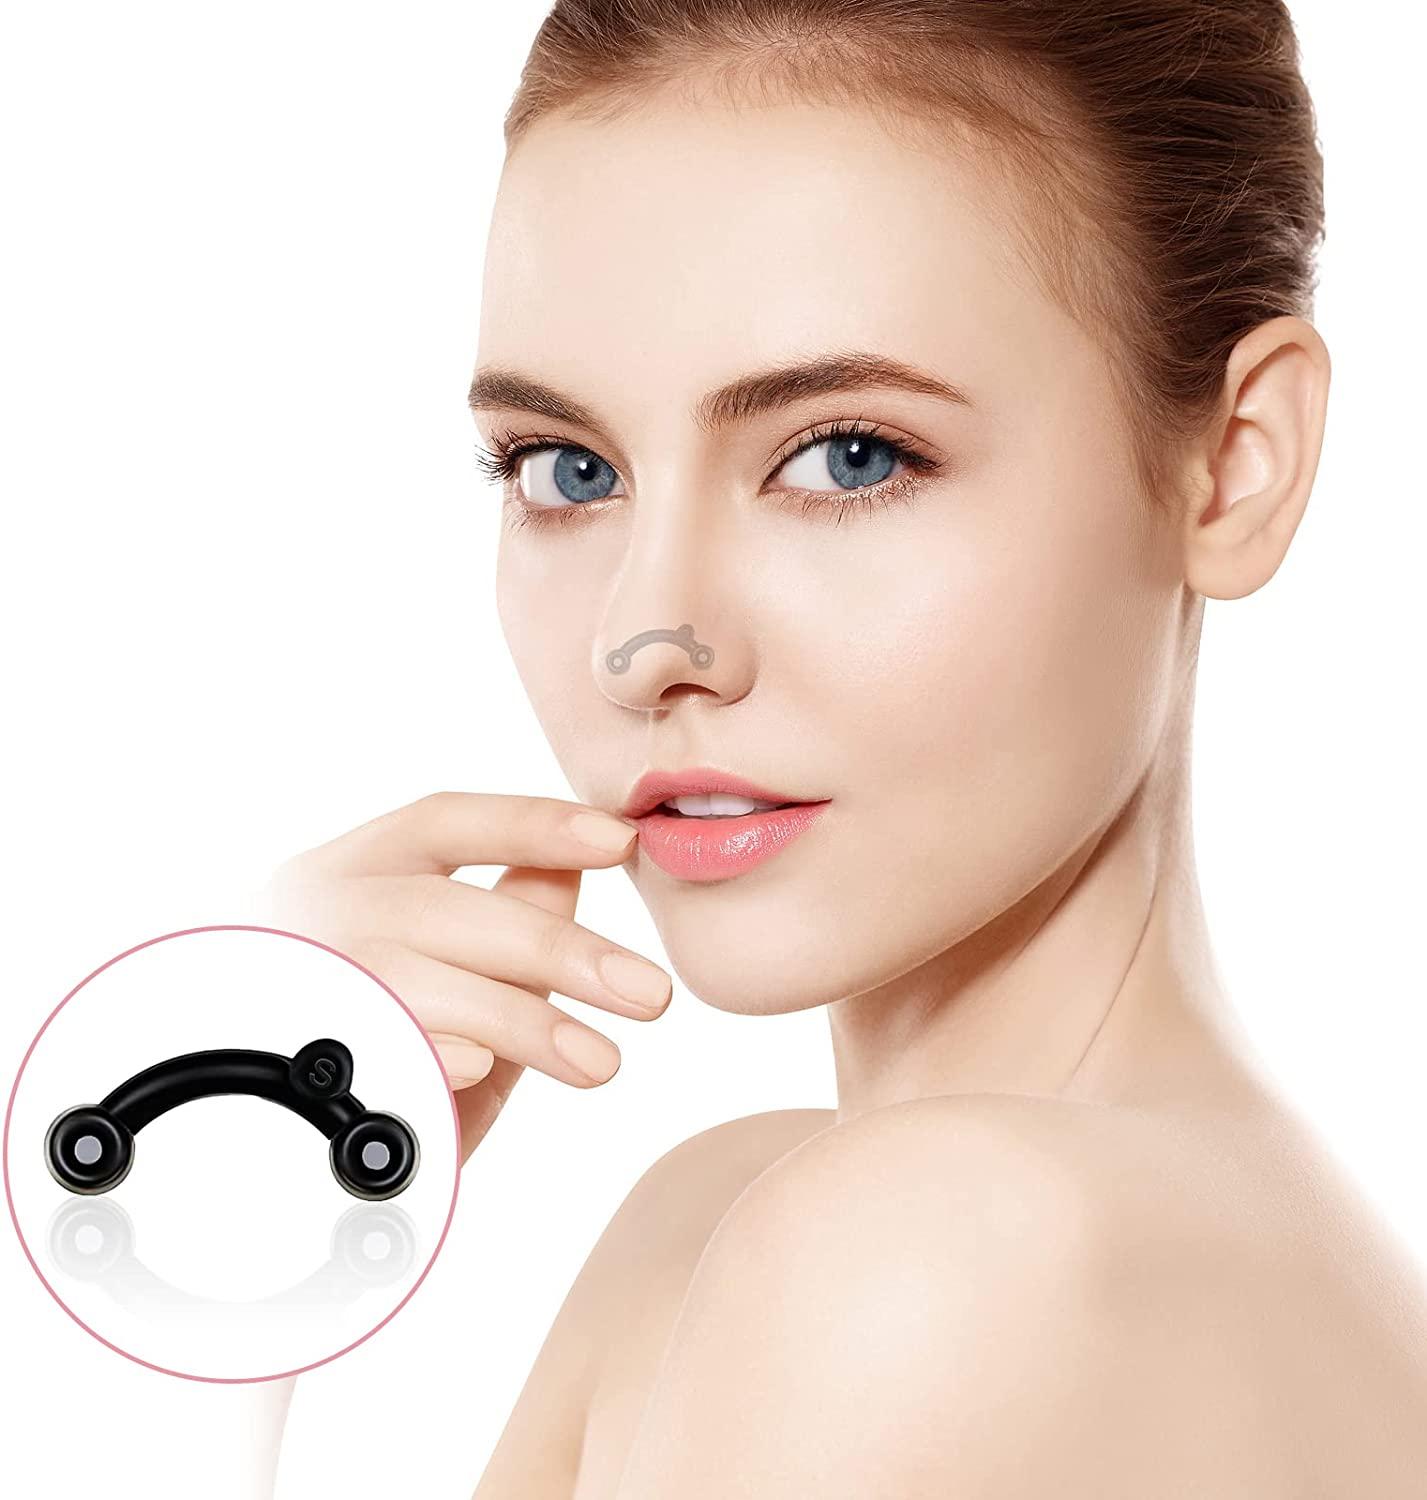 INHDBOX 2 Sets Nose Up Lifting Nose Shaper Lifter Nose Slimmer Nose  Corrector Nose Bridge Straightener Beauty Tool 3 Size Pain Free 2 Packs